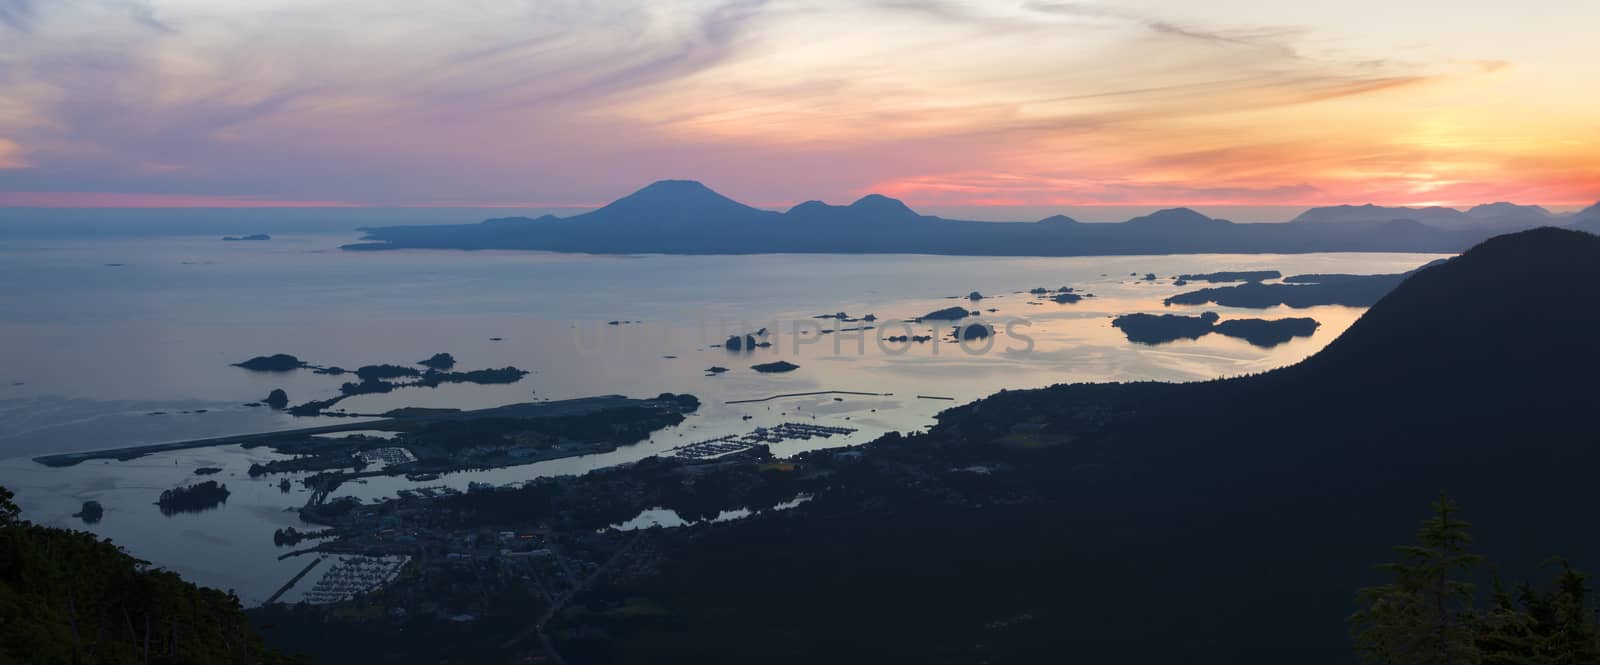 Beautiful panoramic and colorful sunset sky over Sitka Sound with view of Sitka and Mount Edgecumbe from Mount Verstovia peak